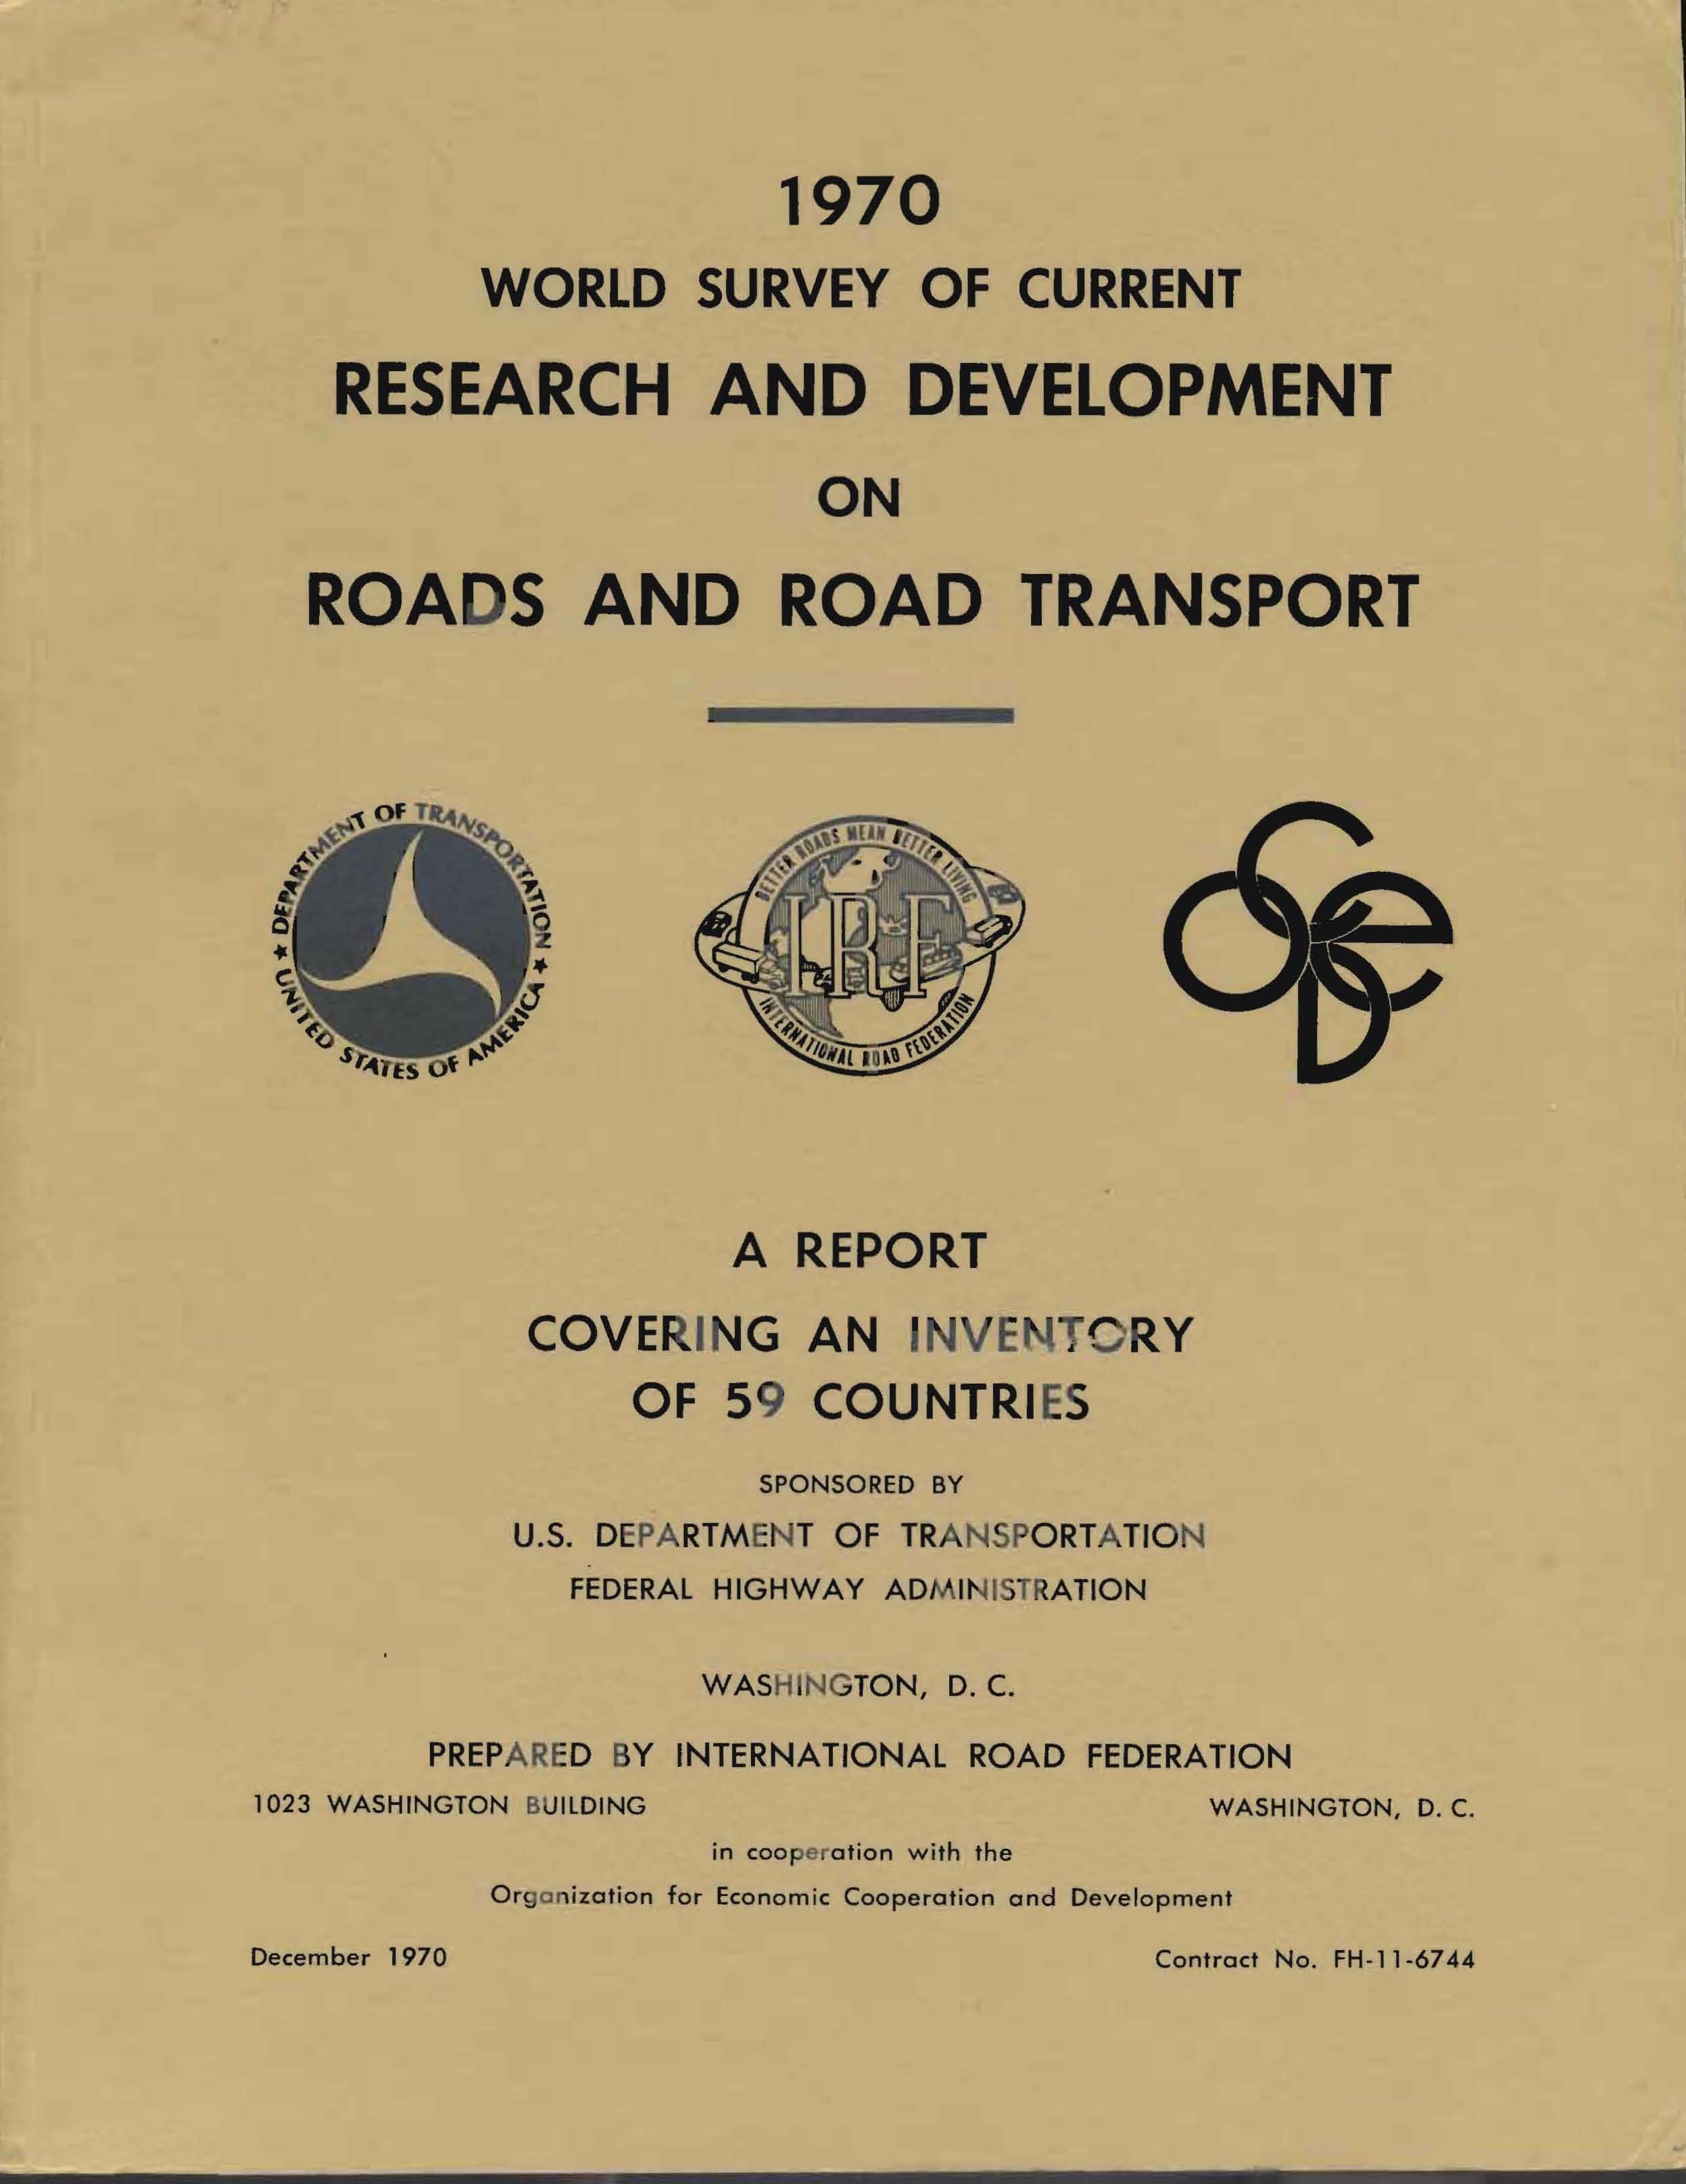 Research and Development on Roads and Road Transport